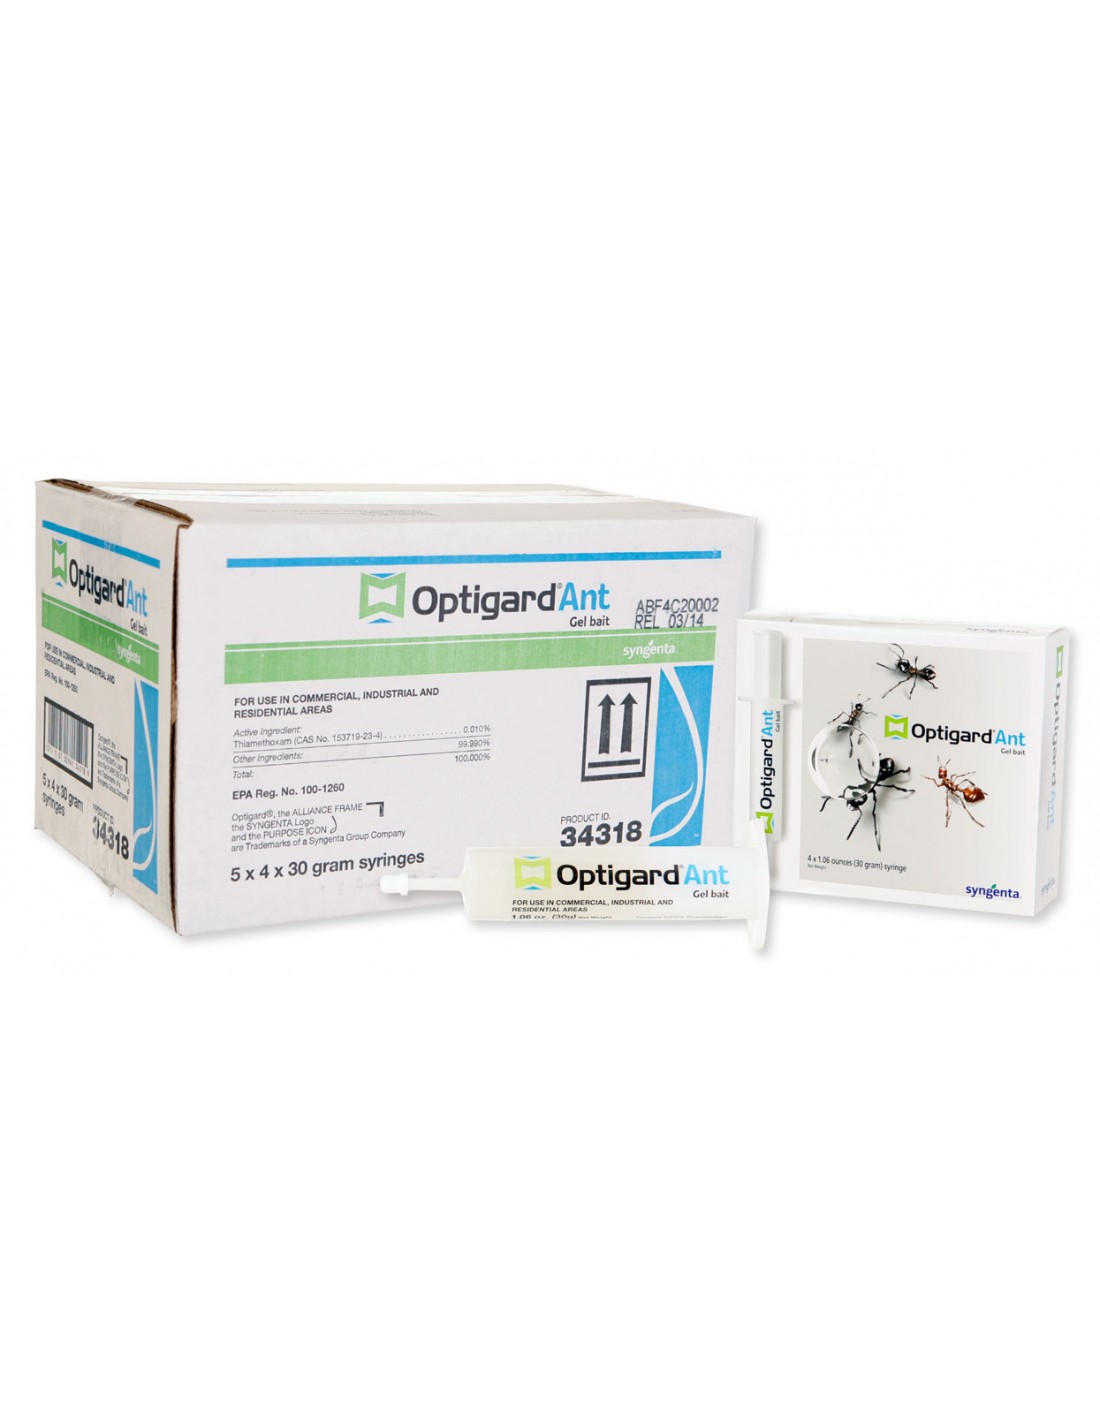 When are the stocks of Optigard Ant Gel 30grams available ?